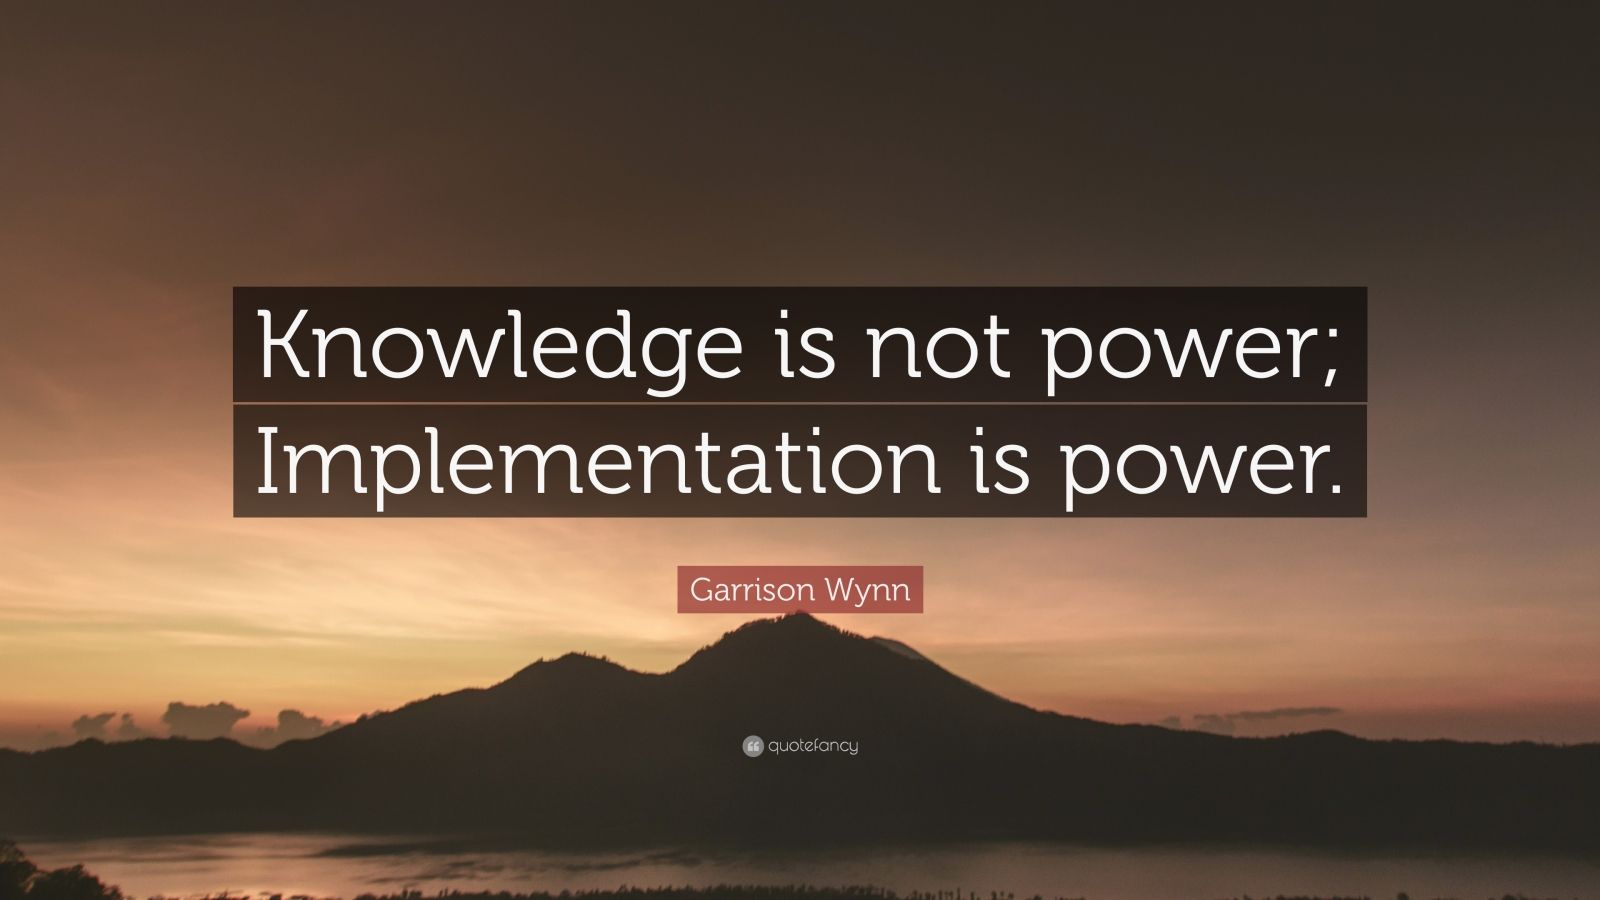 Garrison Wynn Quote “Knowledge is not power; Implementation is power